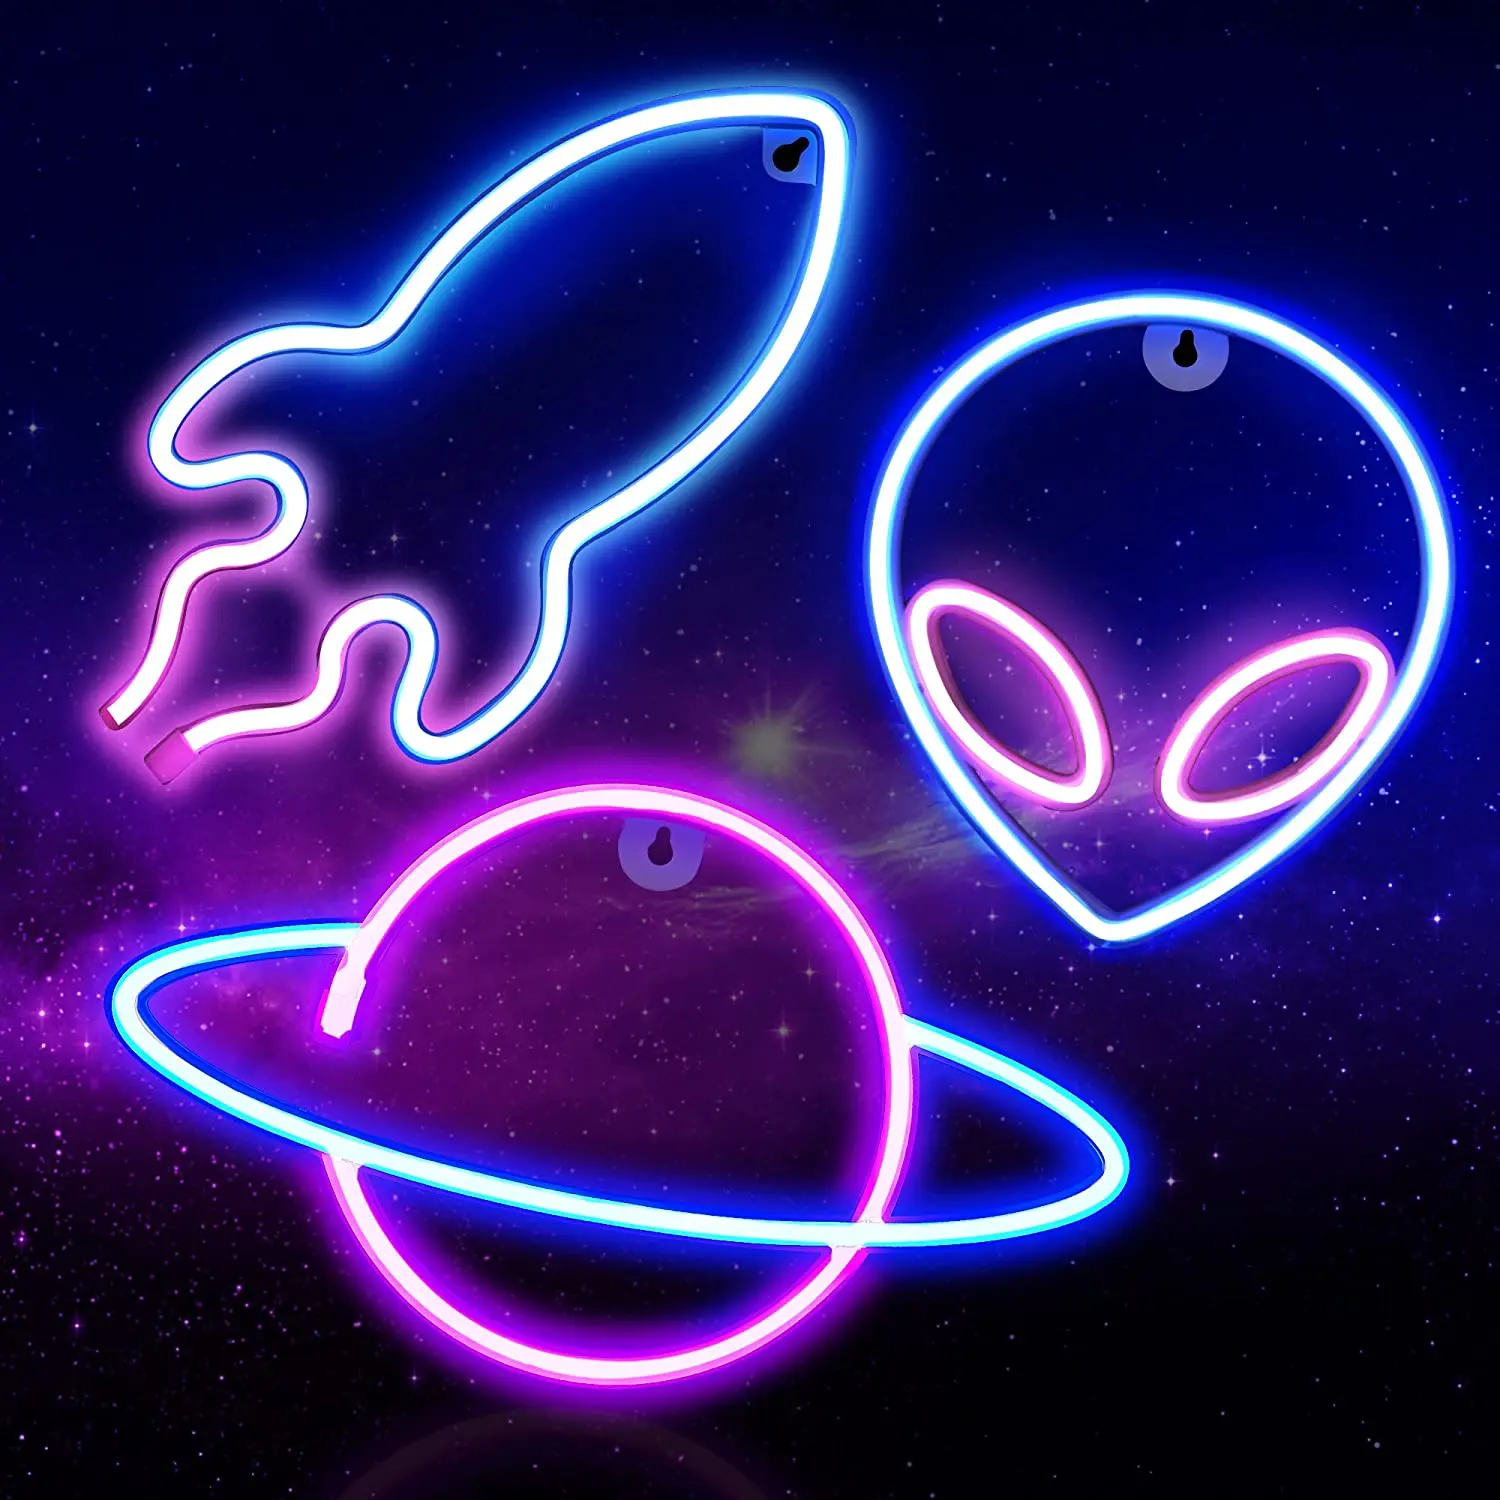 

Alien Planet Rocket Led Neon Sign Aesthetic Hanging Neon Light USB or Battery Powered with On/Off Switch